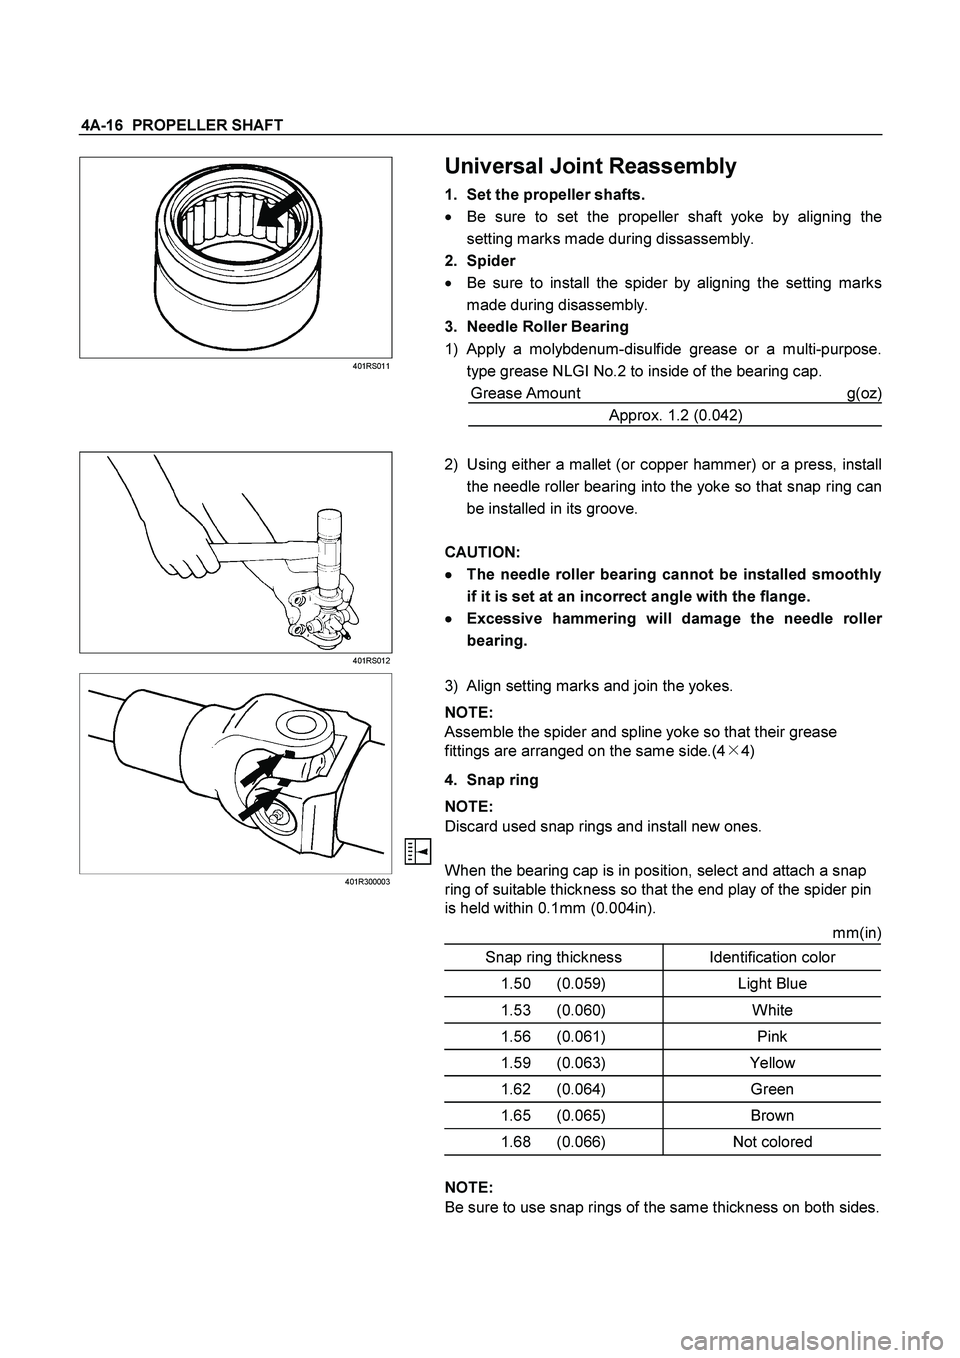 ISUZU TF SERIES 2004  Workshop Manual 4A-16  PROPELLER SHAFT 
 401RS011 
 
 
 
 
 
 
 
 Universal Joint Reassembly 
1.  Set the propeller shafts. 

  Be sure to set the propeller shaft yoke by aligning the
setting marks made during dissa